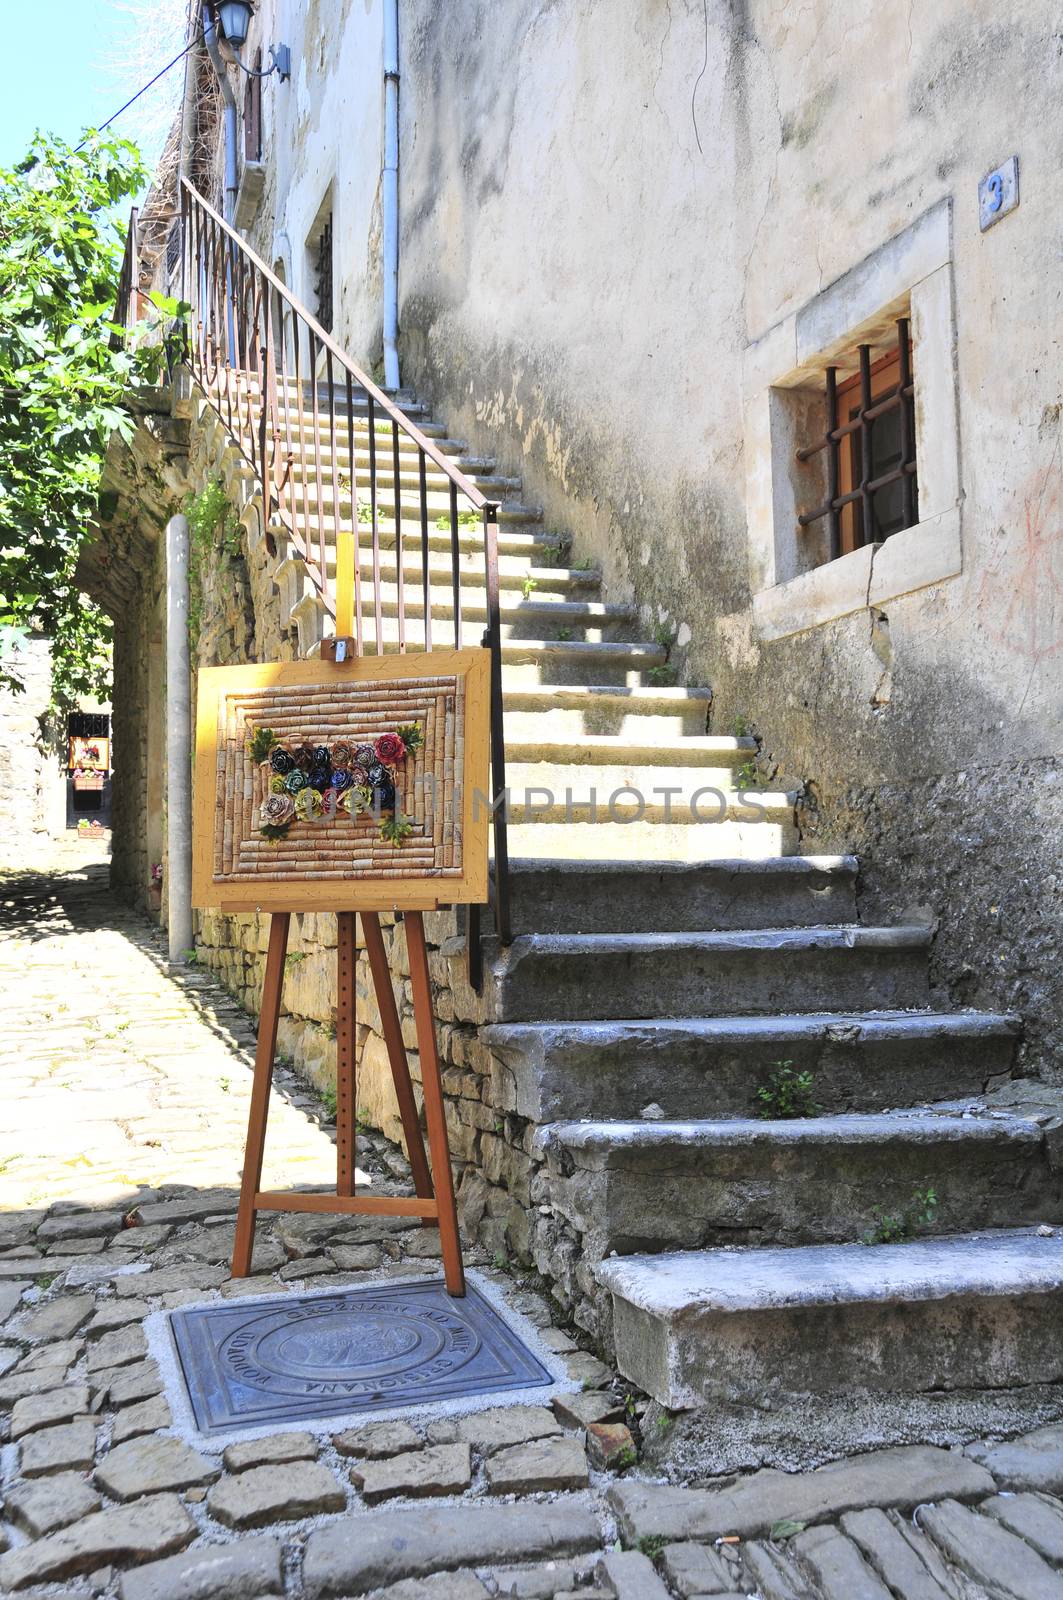 Artwork in front of stairs to artist's shop